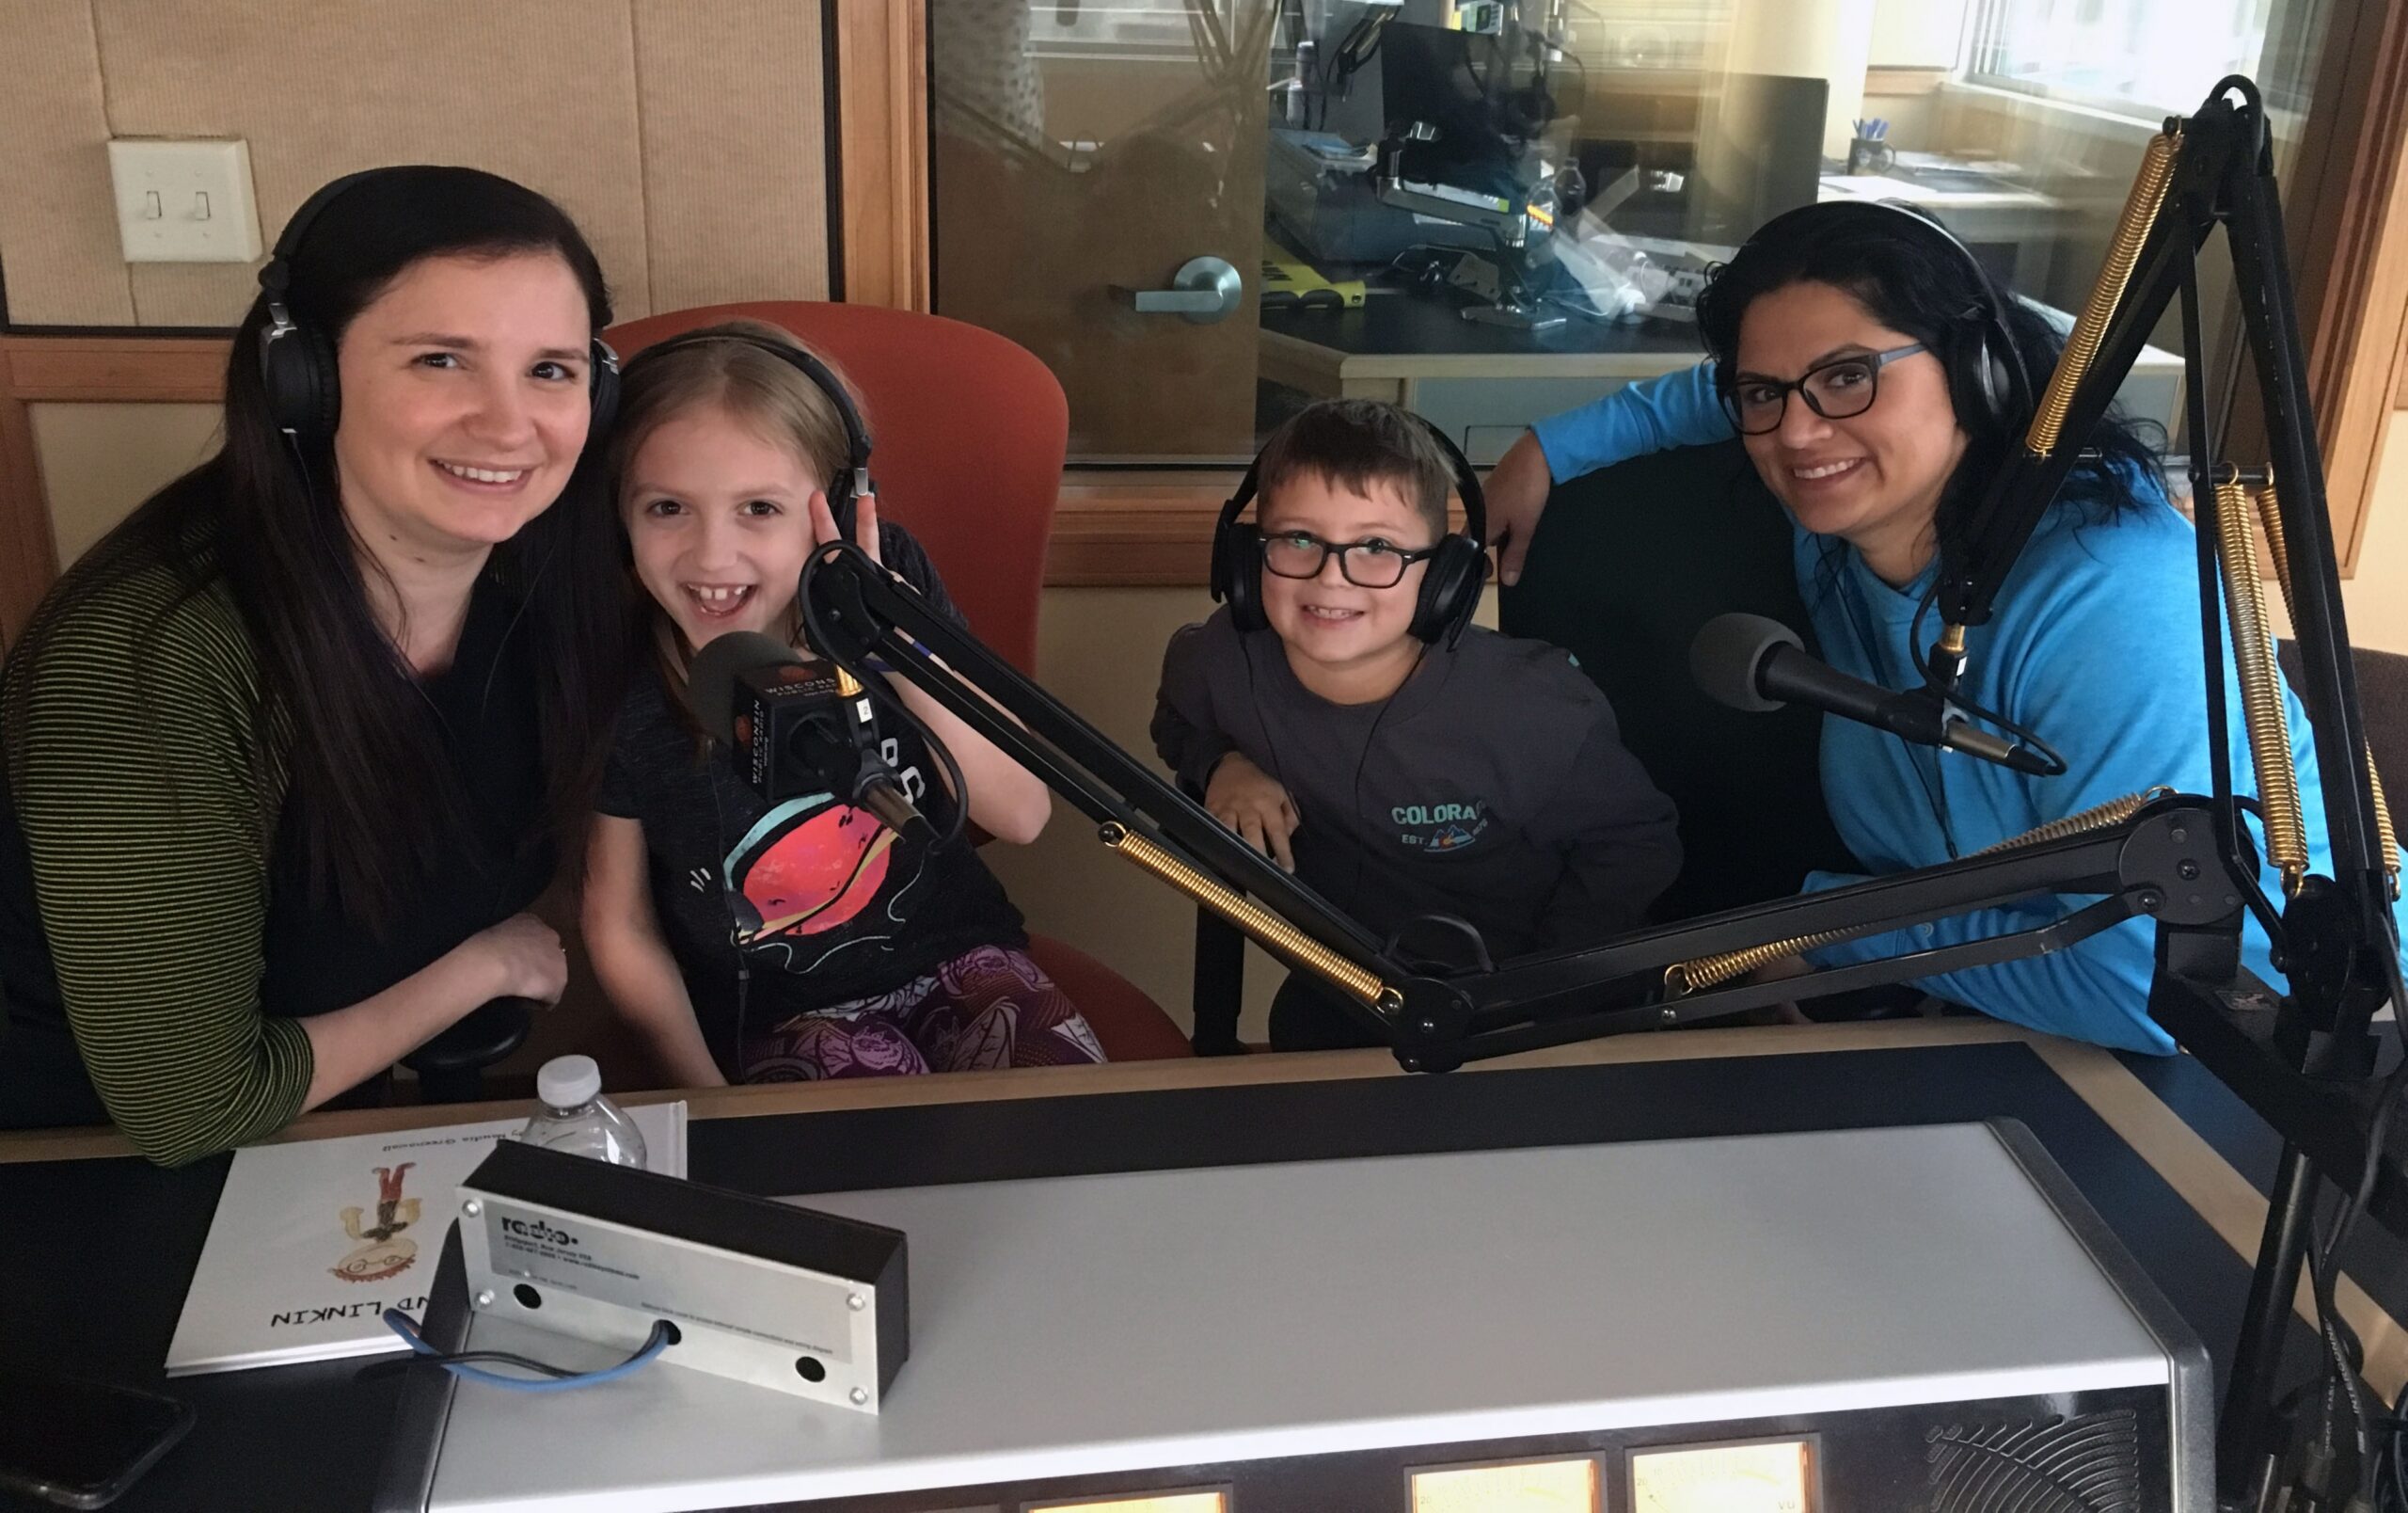 Naudia Greenawalt, second from left, with her mother, Dolores, left, and Linkin Eger, second from right, with his mother, Kelly, right, in WPR's Milwaukee studios.